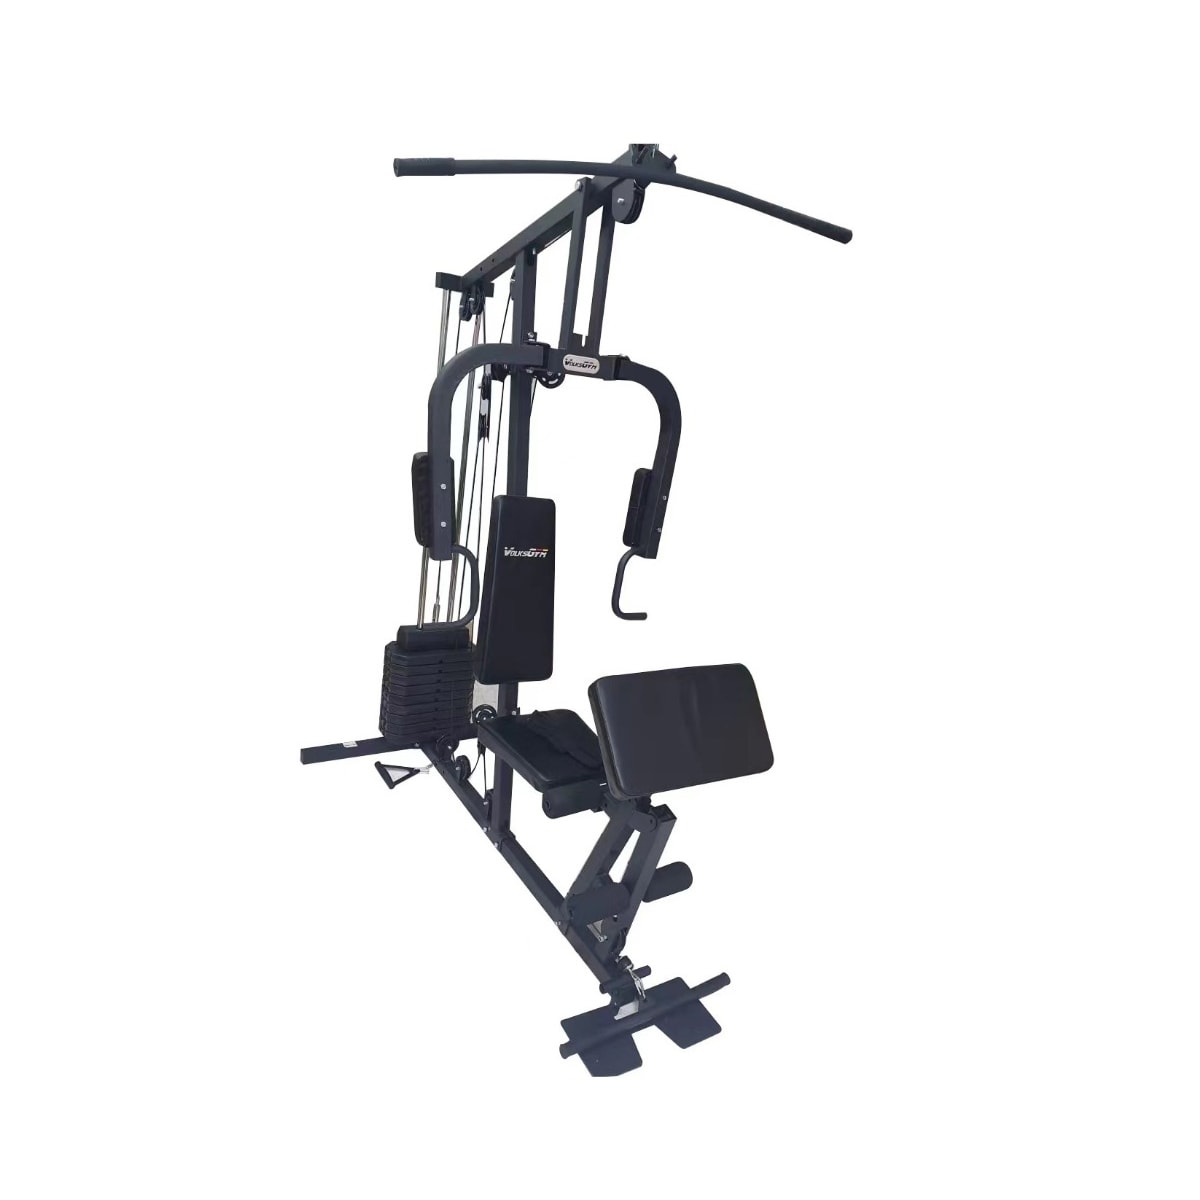 Volksgym Home Gym with Weight Stack 100 lbs